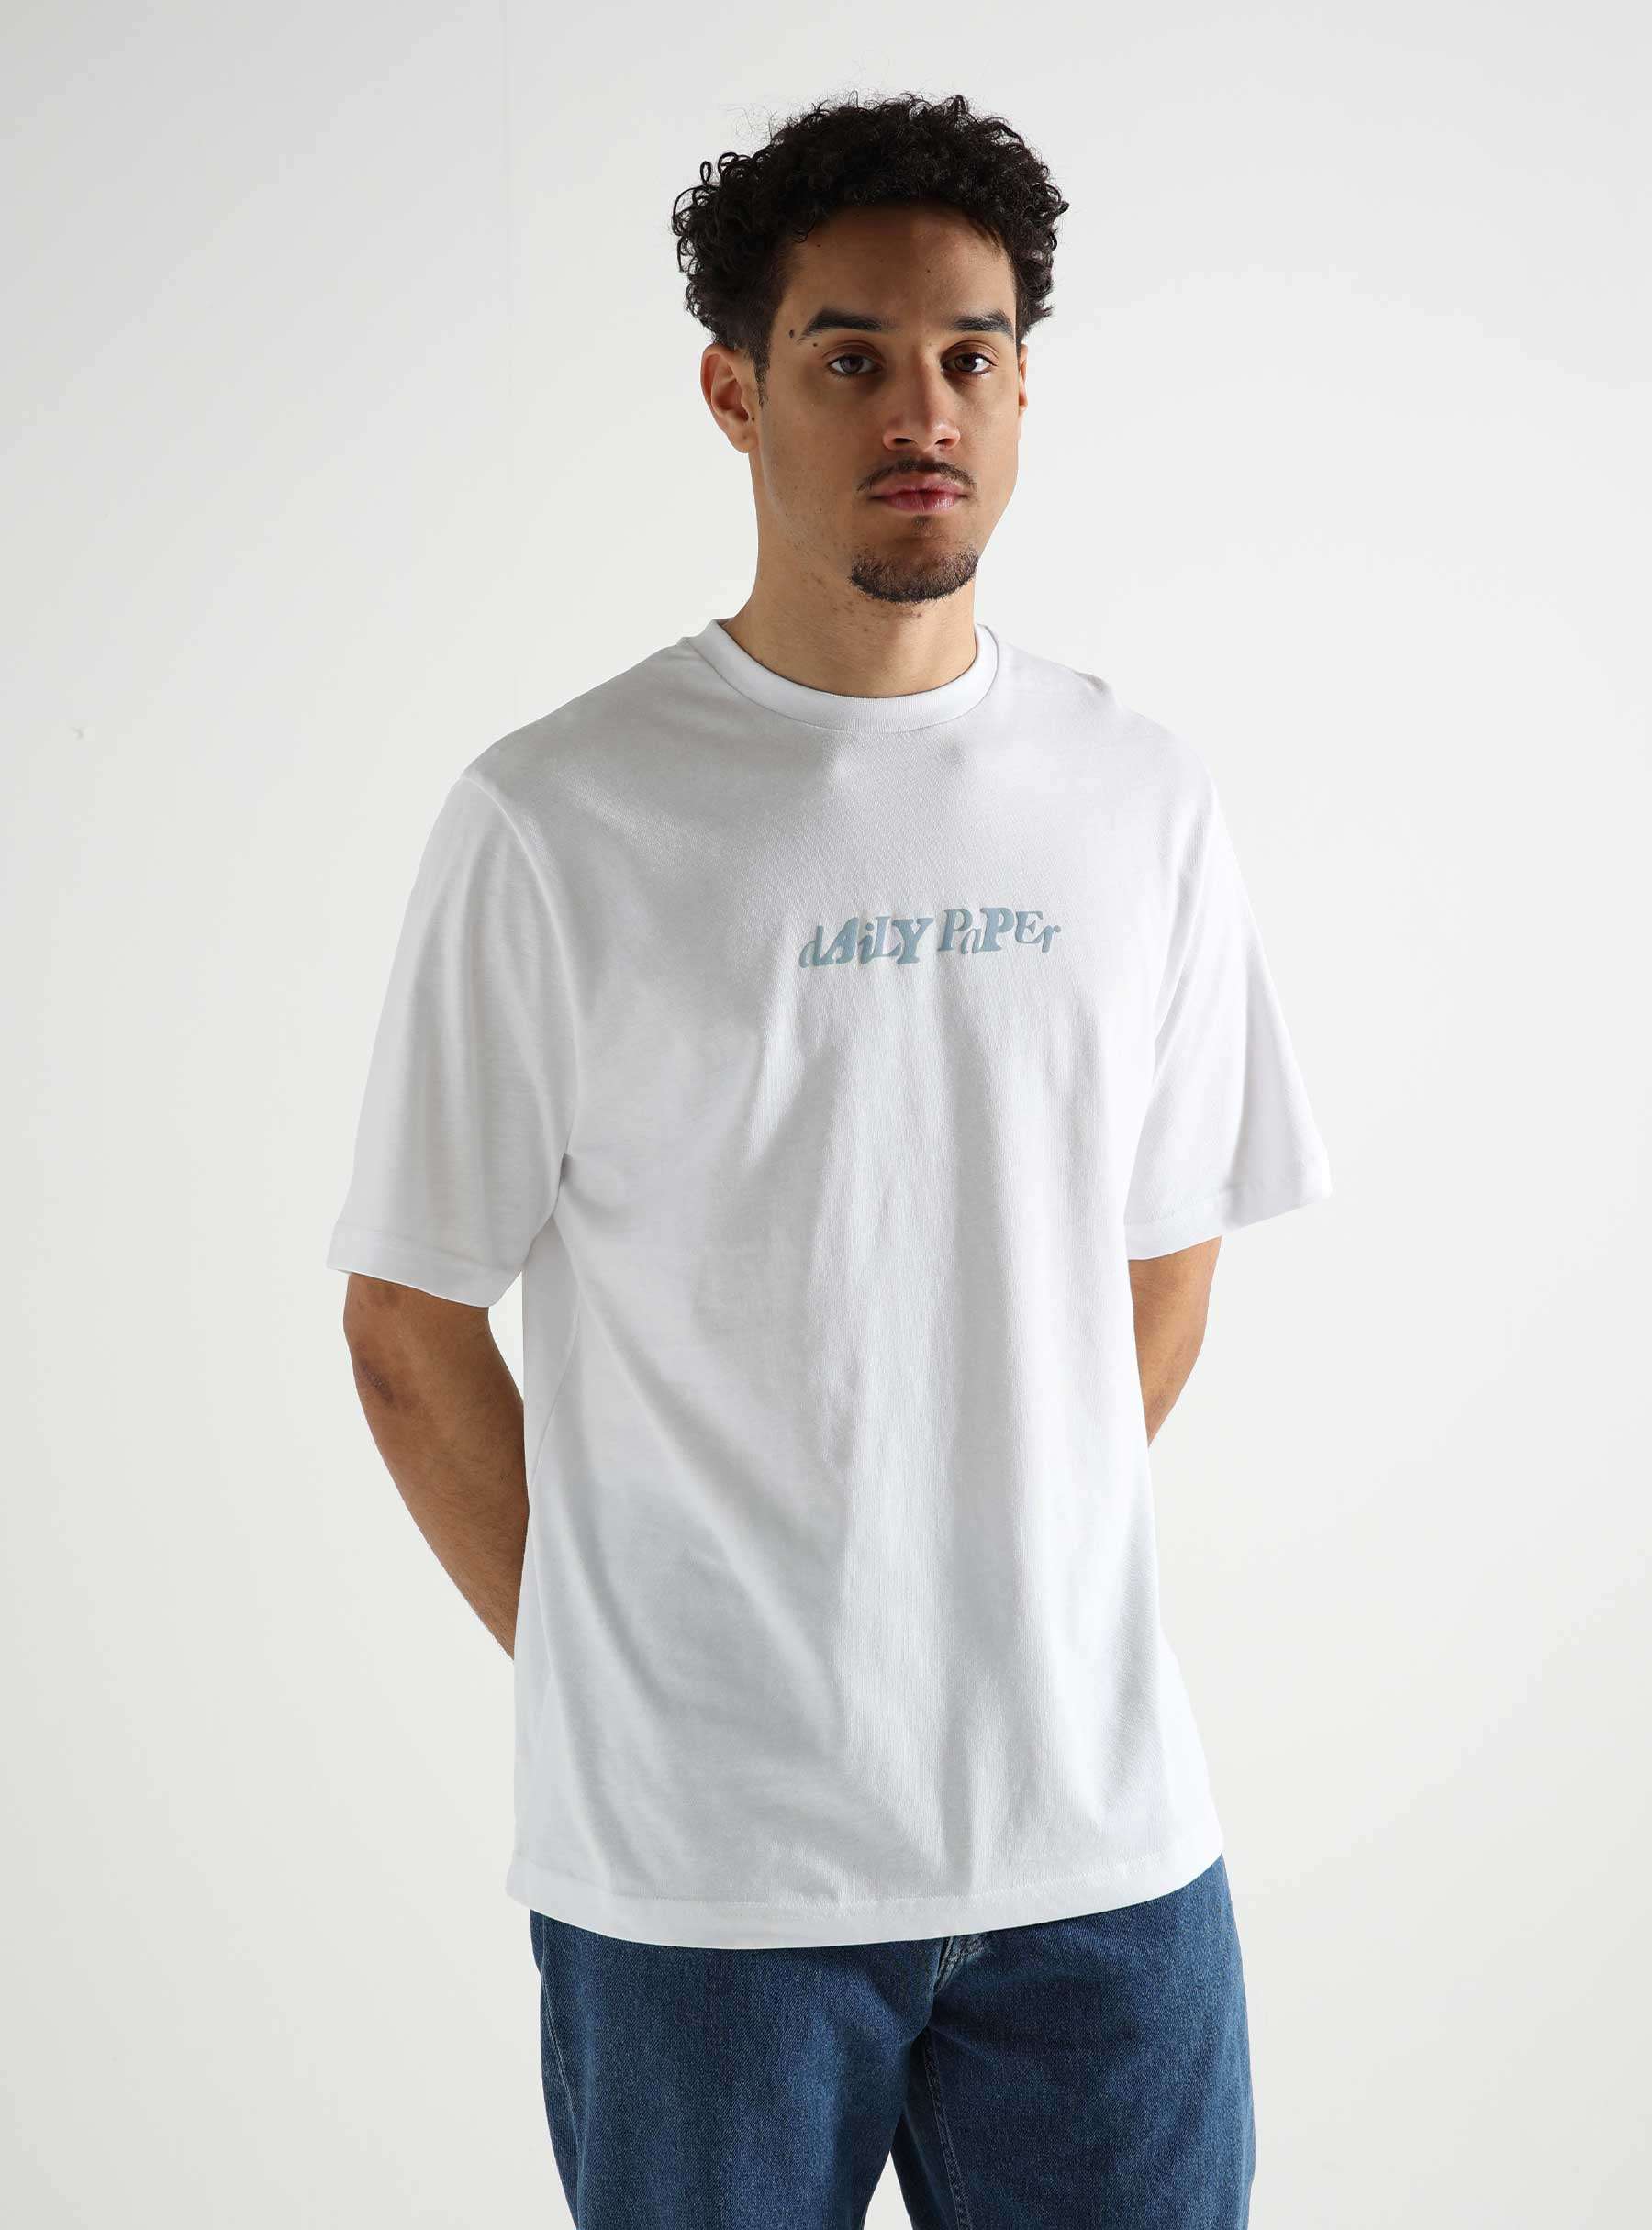 Unified Type T-Shirt White 2413070